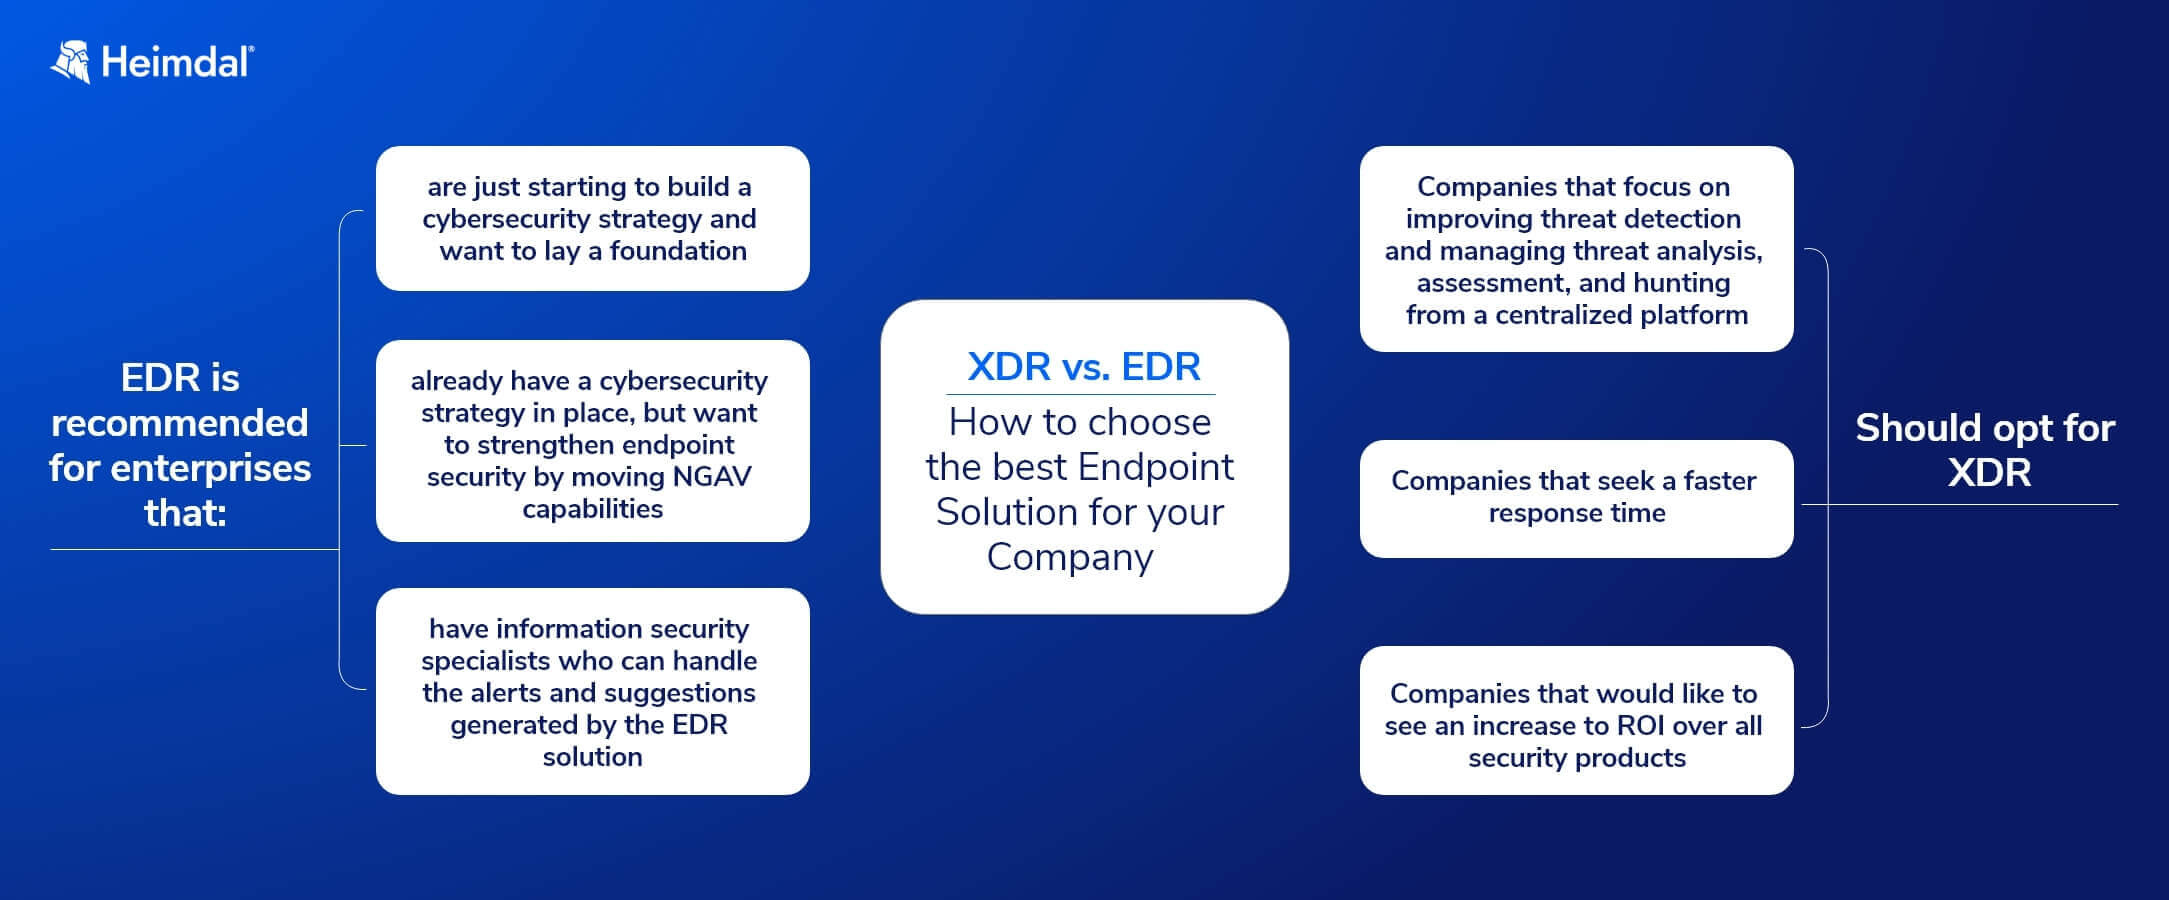 See hot to choose between XDR-vs-EDR